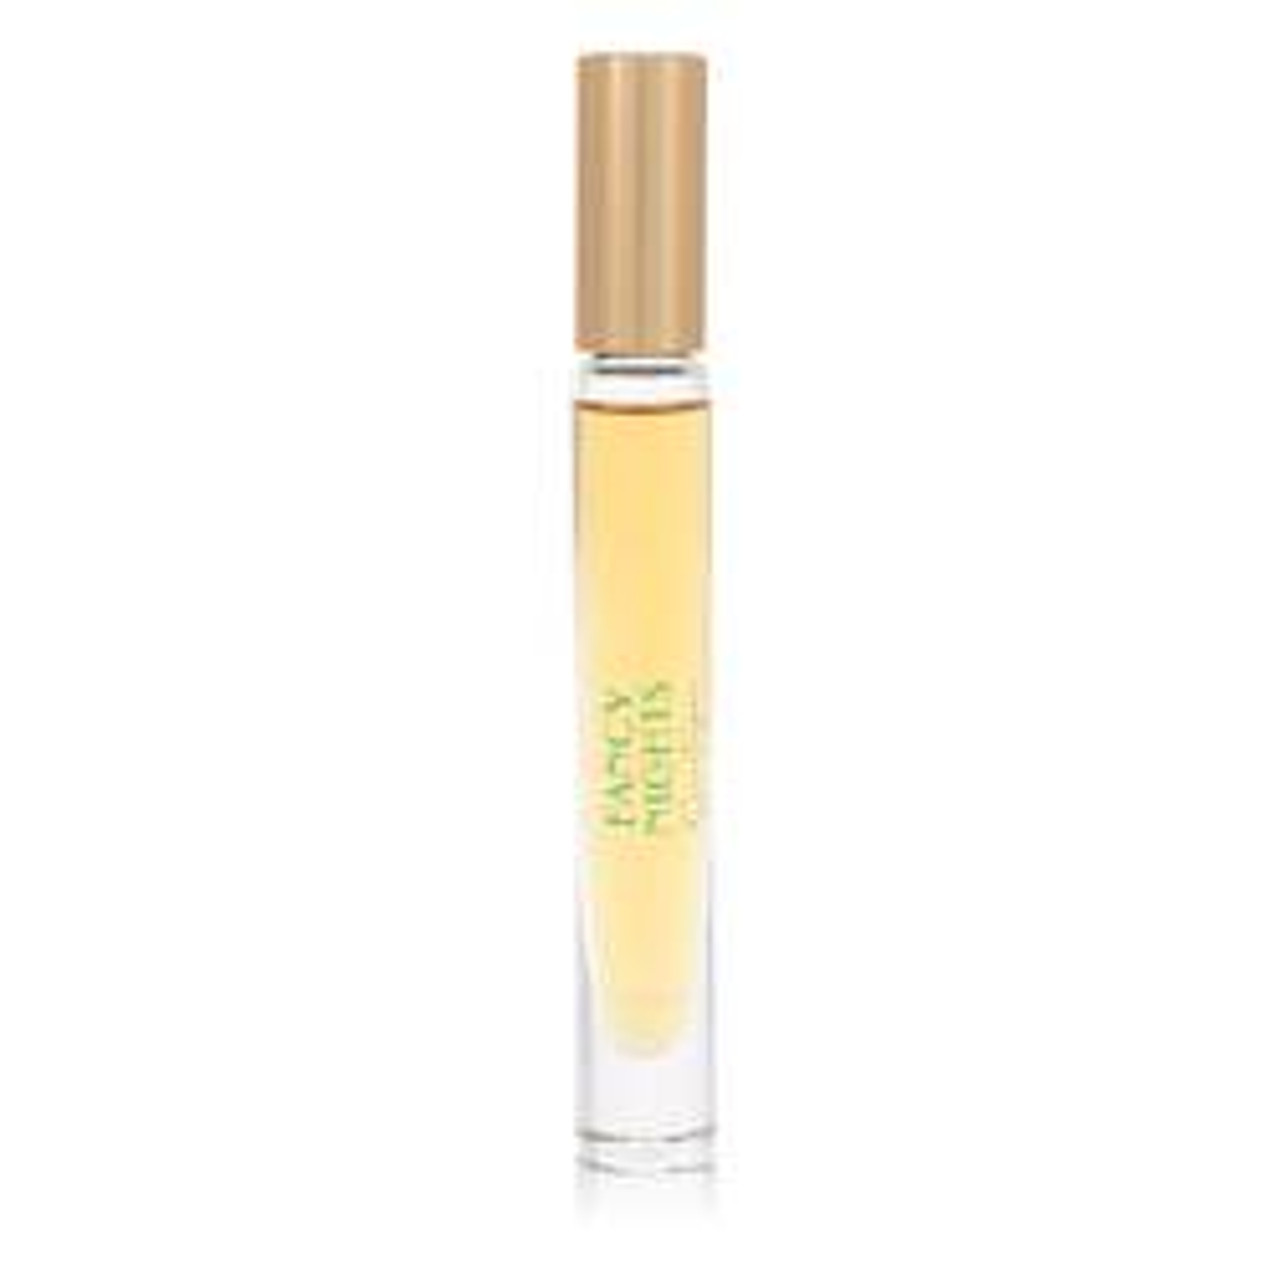 Fancy Nights Perfume By Jessica Simpson Roll on 0.2 oz for Women - *Pre-Order